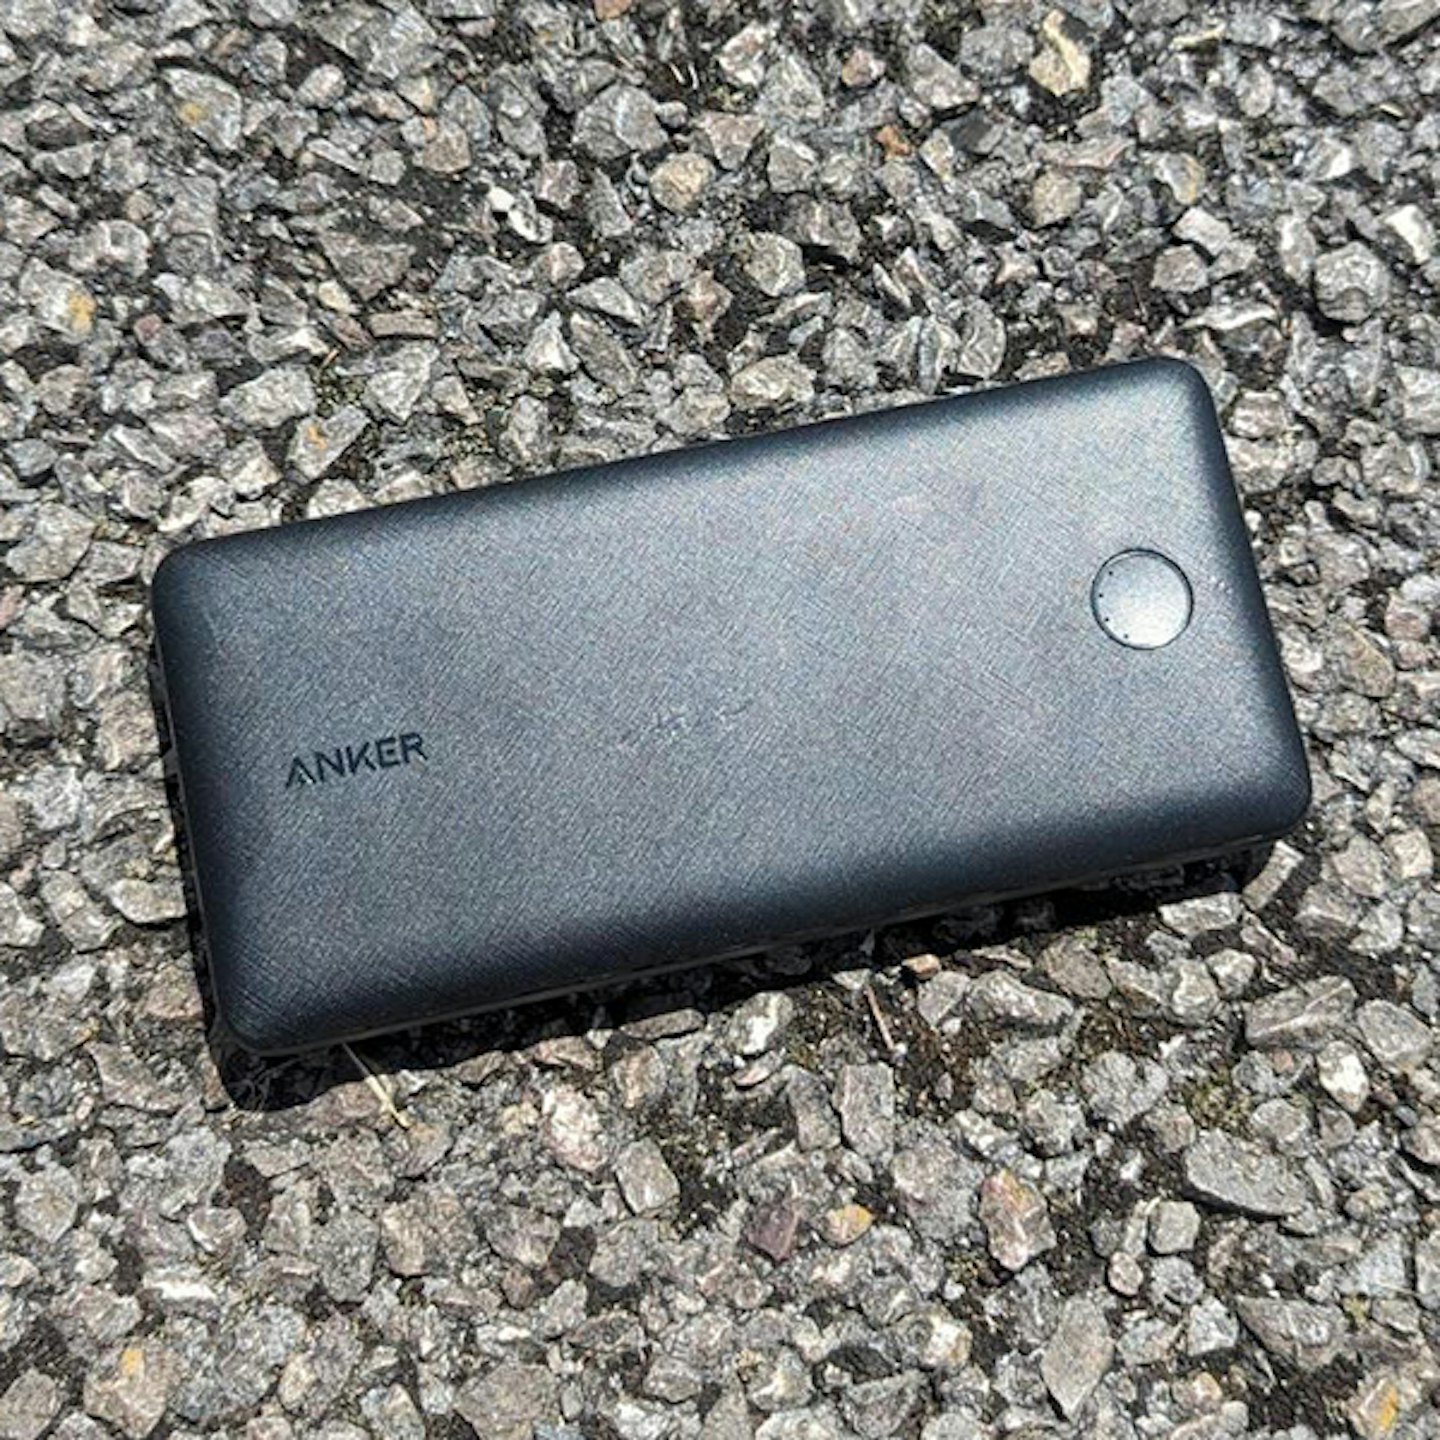 Anker 525 powerbank love trails camping essential